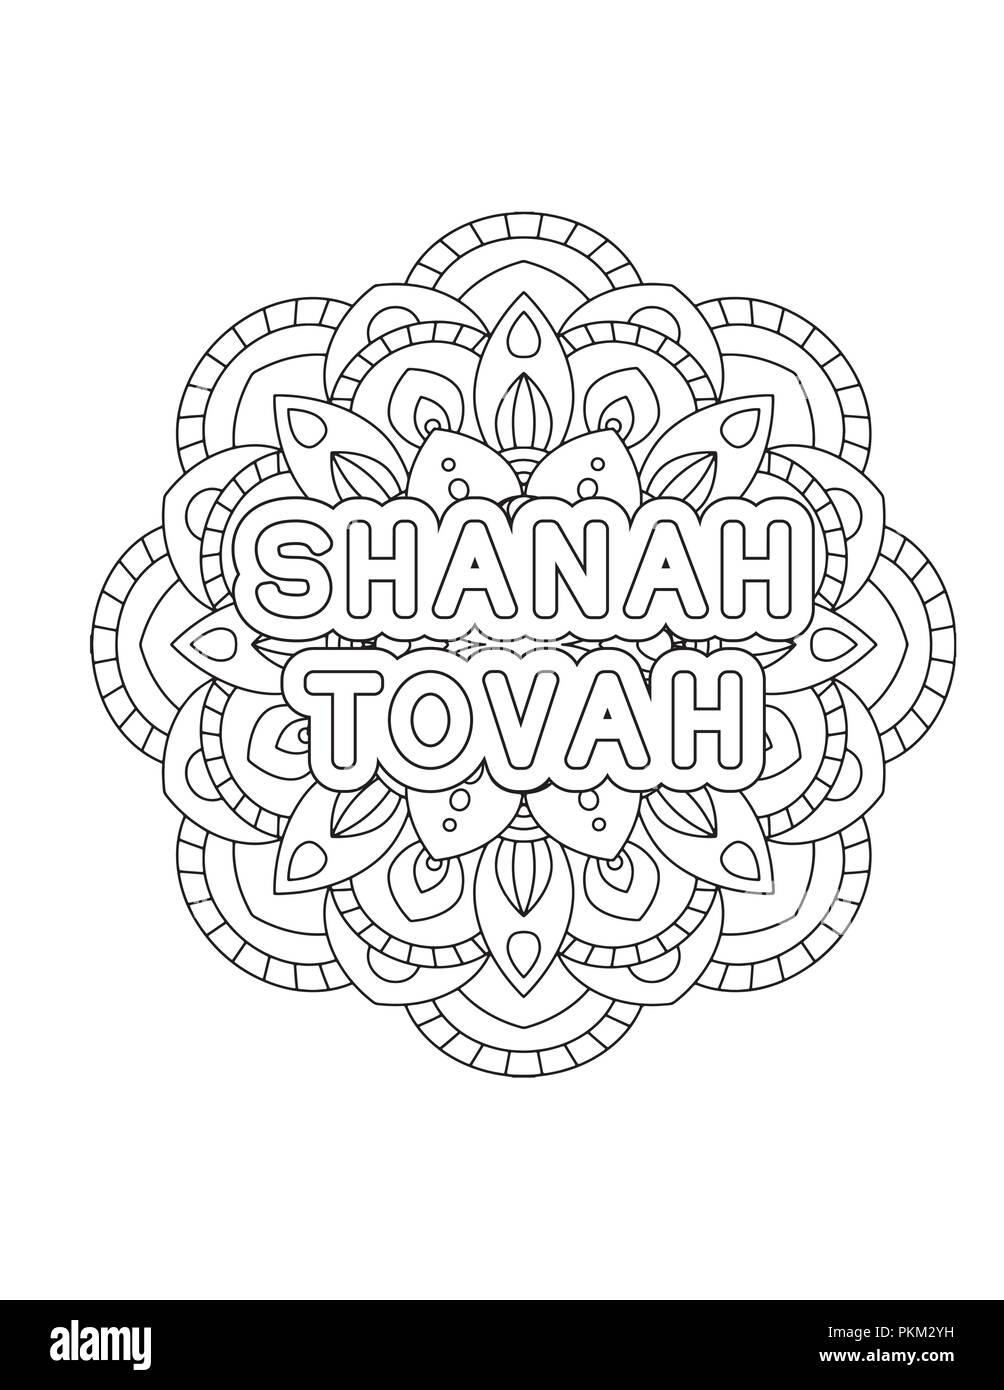 Rosh hashanah - Jewish New Year coloring page with abstract ornament. Black and white vector illustration. Stock Vector